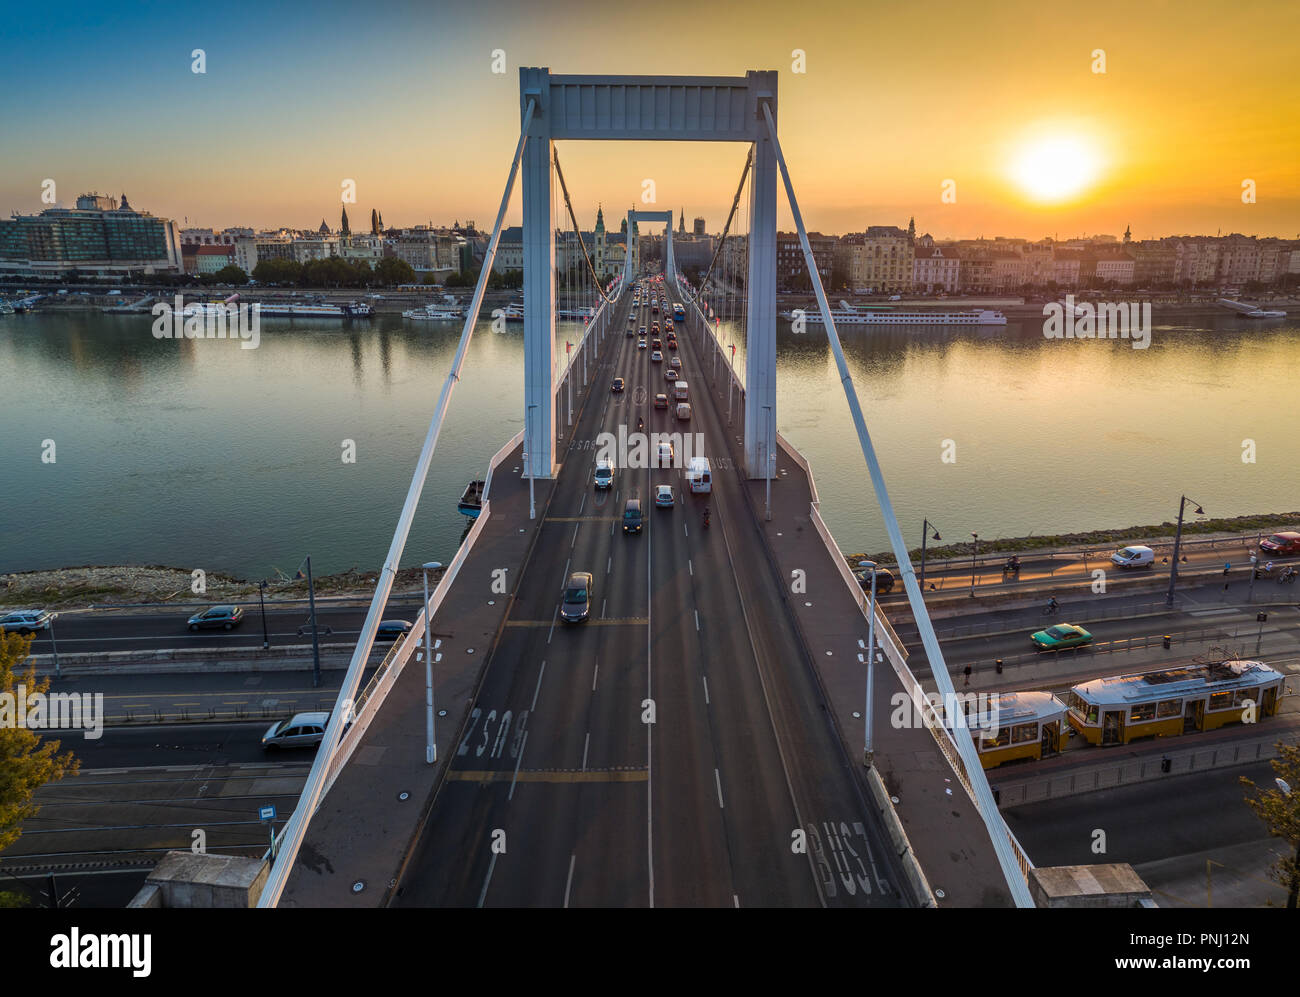 Budapest, Hungary - Beautiful Elisabeth Bridge (Erzsebet hid) at sunrise with golden and blue sky, traditional yellow tram and heavy morning traffic Stock Photo